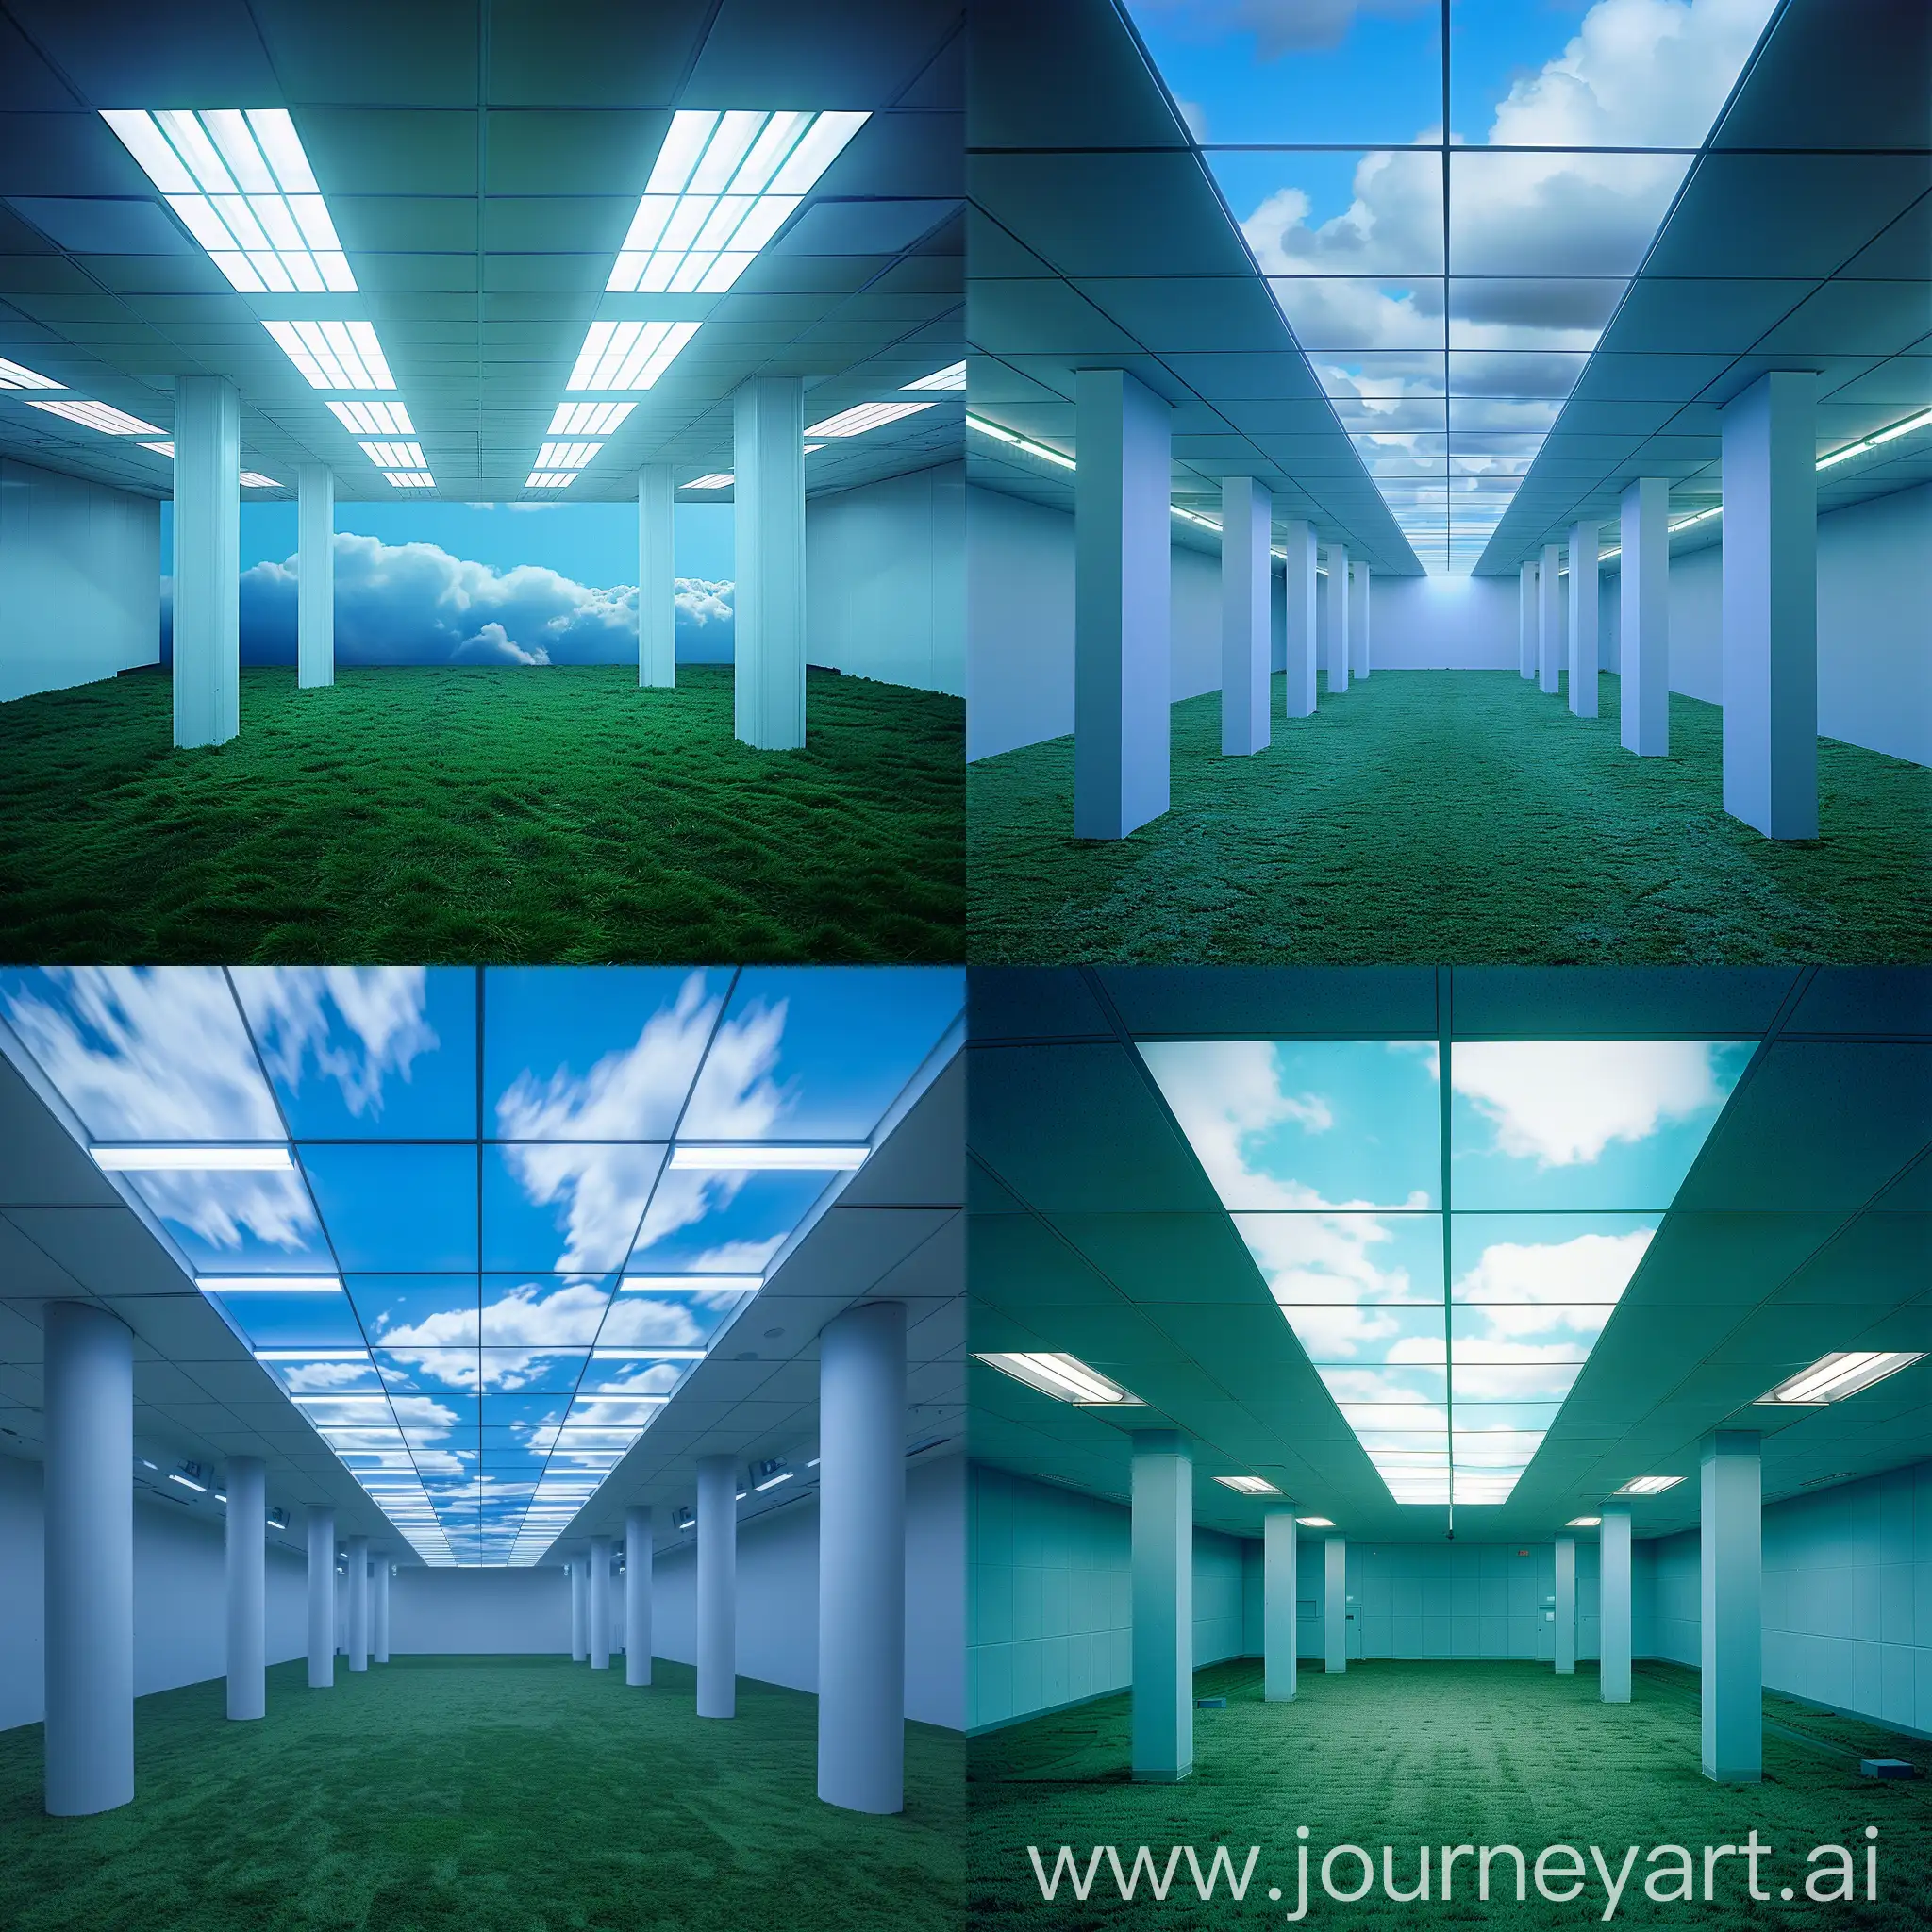 Liminal-Airport-Lounge-with-Grass-Floor-and-Pillars-under-Blue-Sky-and-Clouds